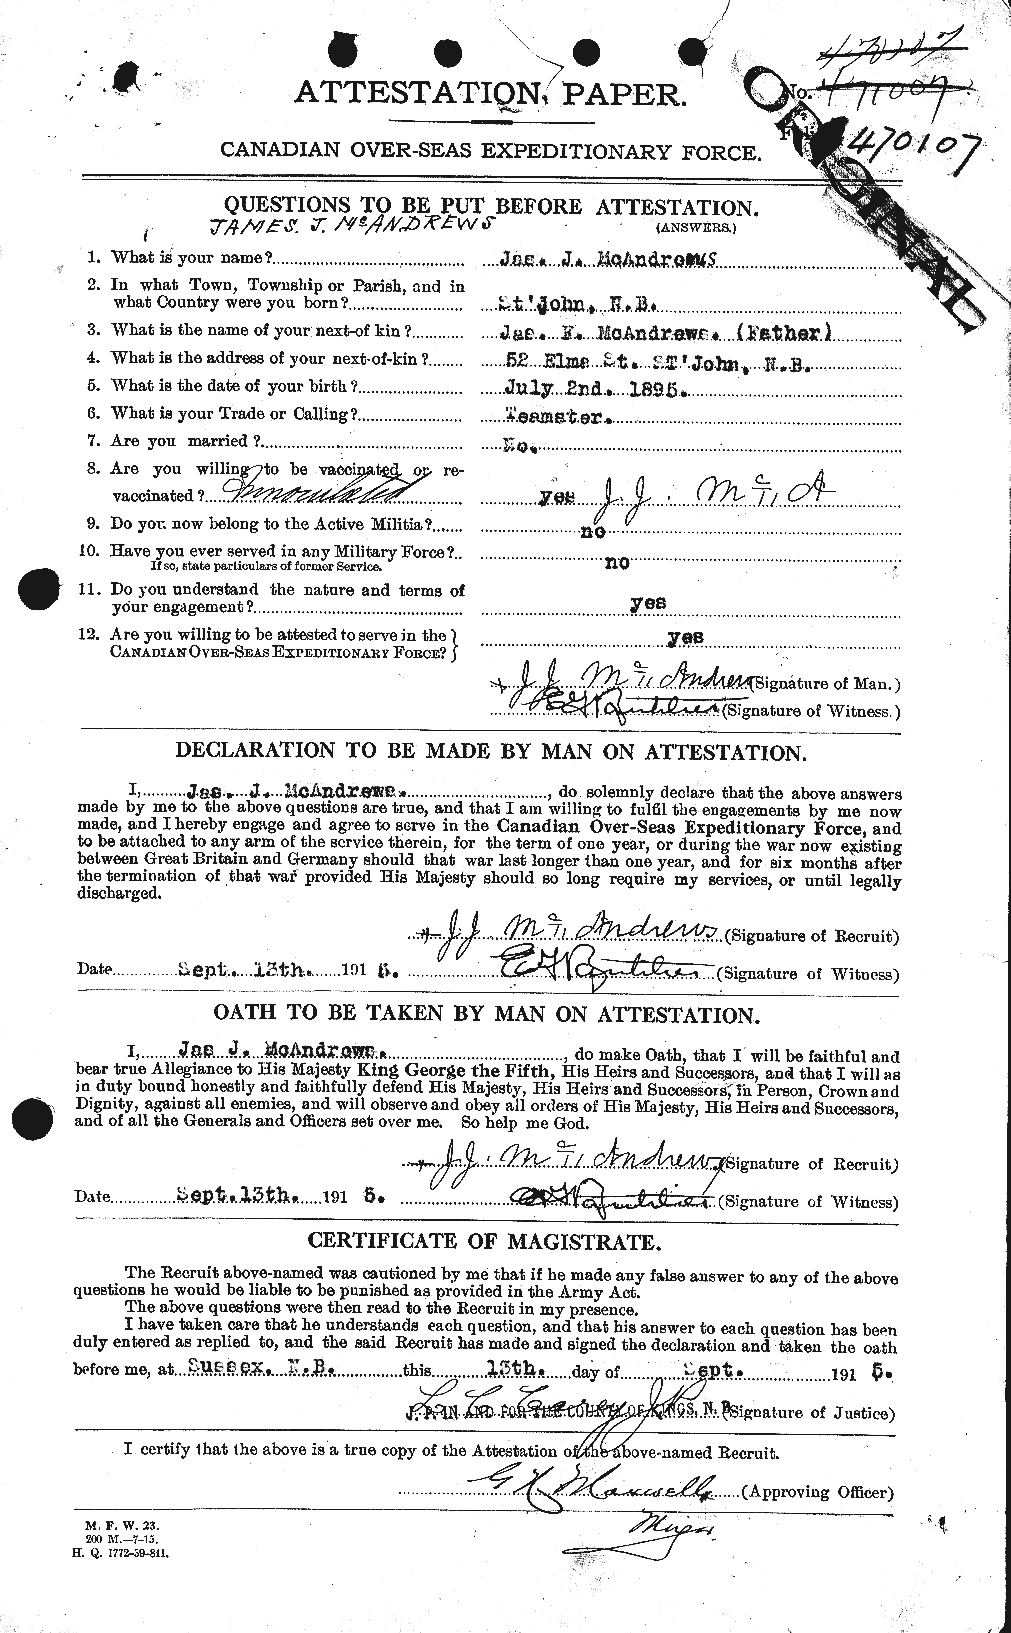 Personnel Records of the First World War - CEF 131402a